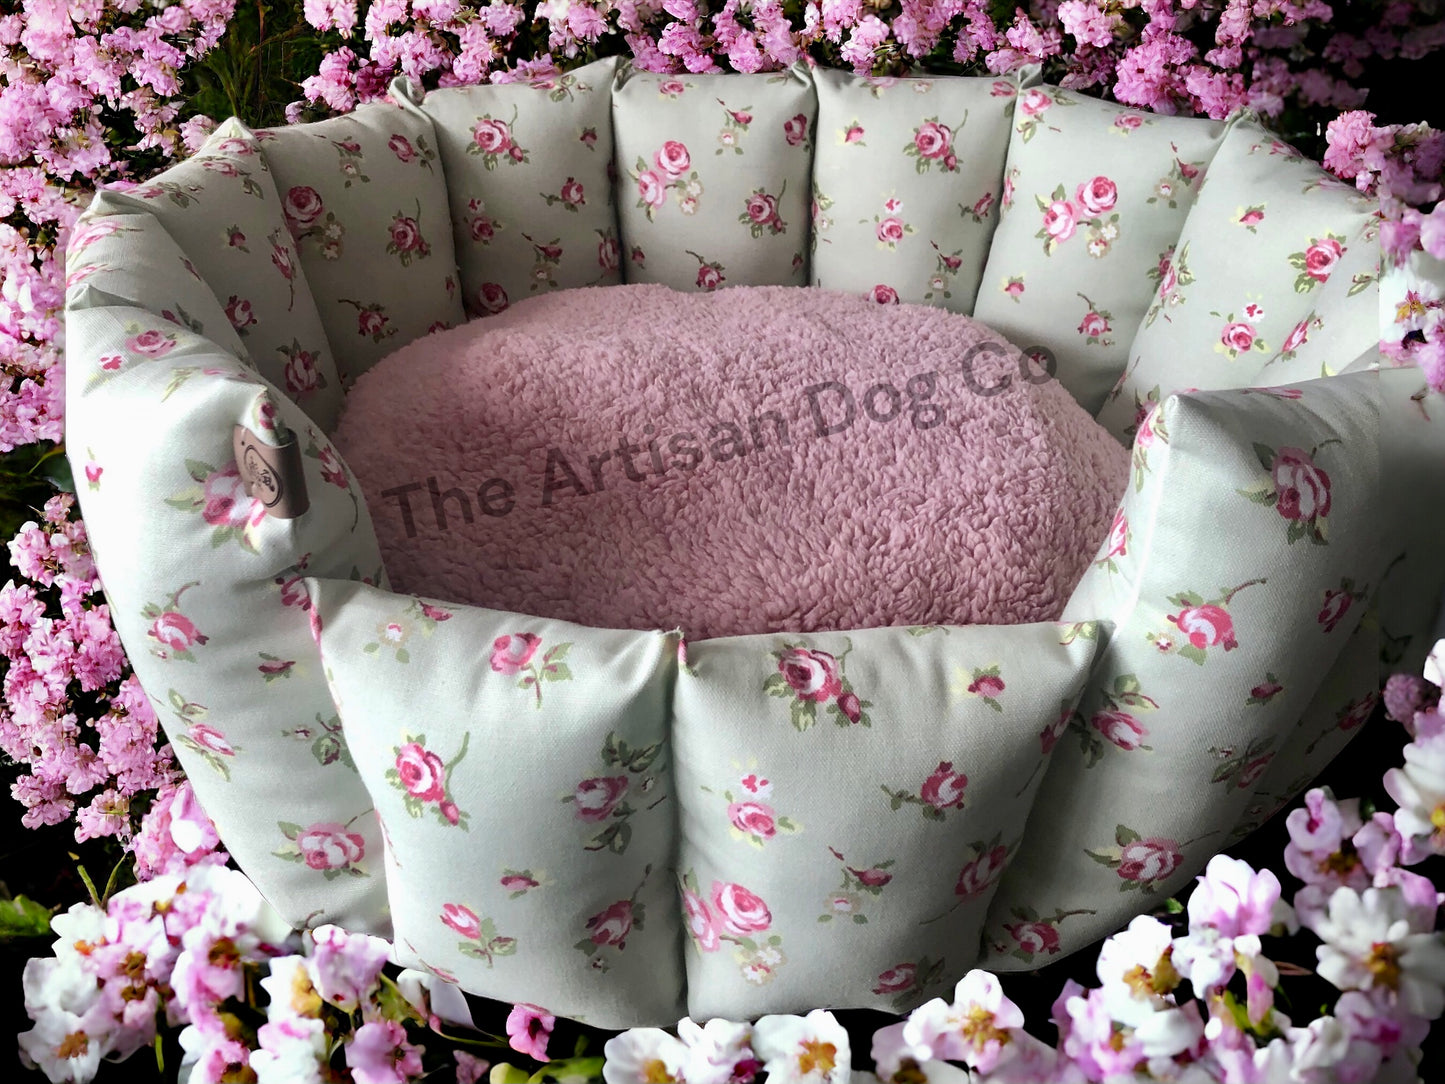 Luxury Handcrafted Pocket Sided Pet/Dog Bed - The Dolly Collection